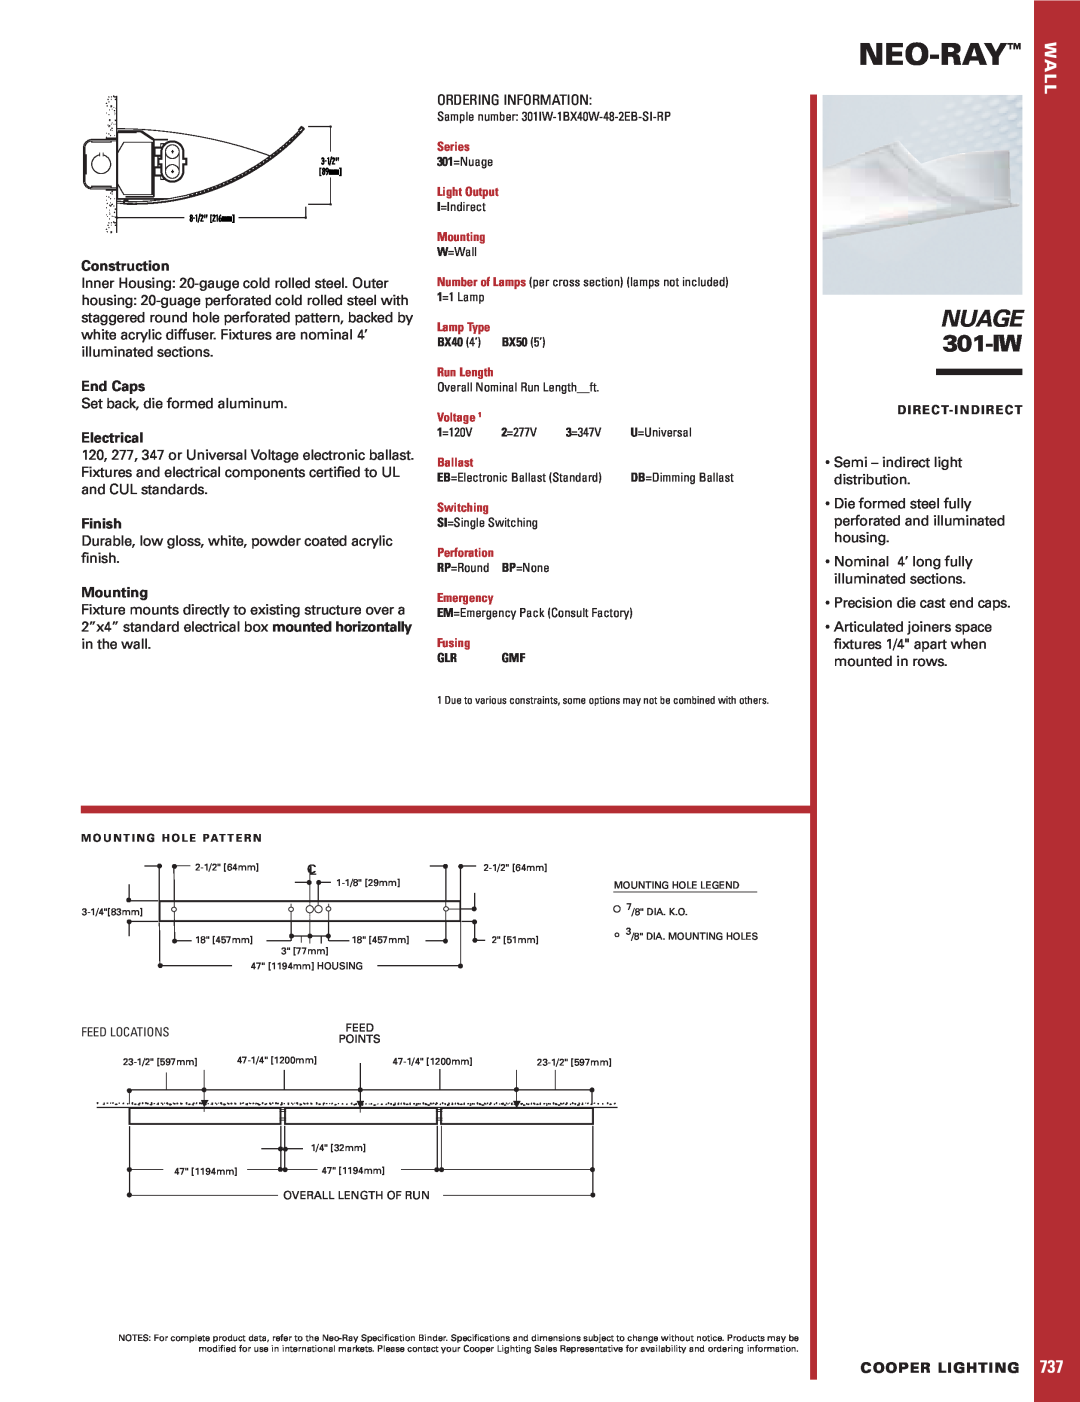 Cooper Lighting specifications Neo-Ray, NUAGE 301-IW, Construction, End Caps, Electrical, Finish, Mounting 